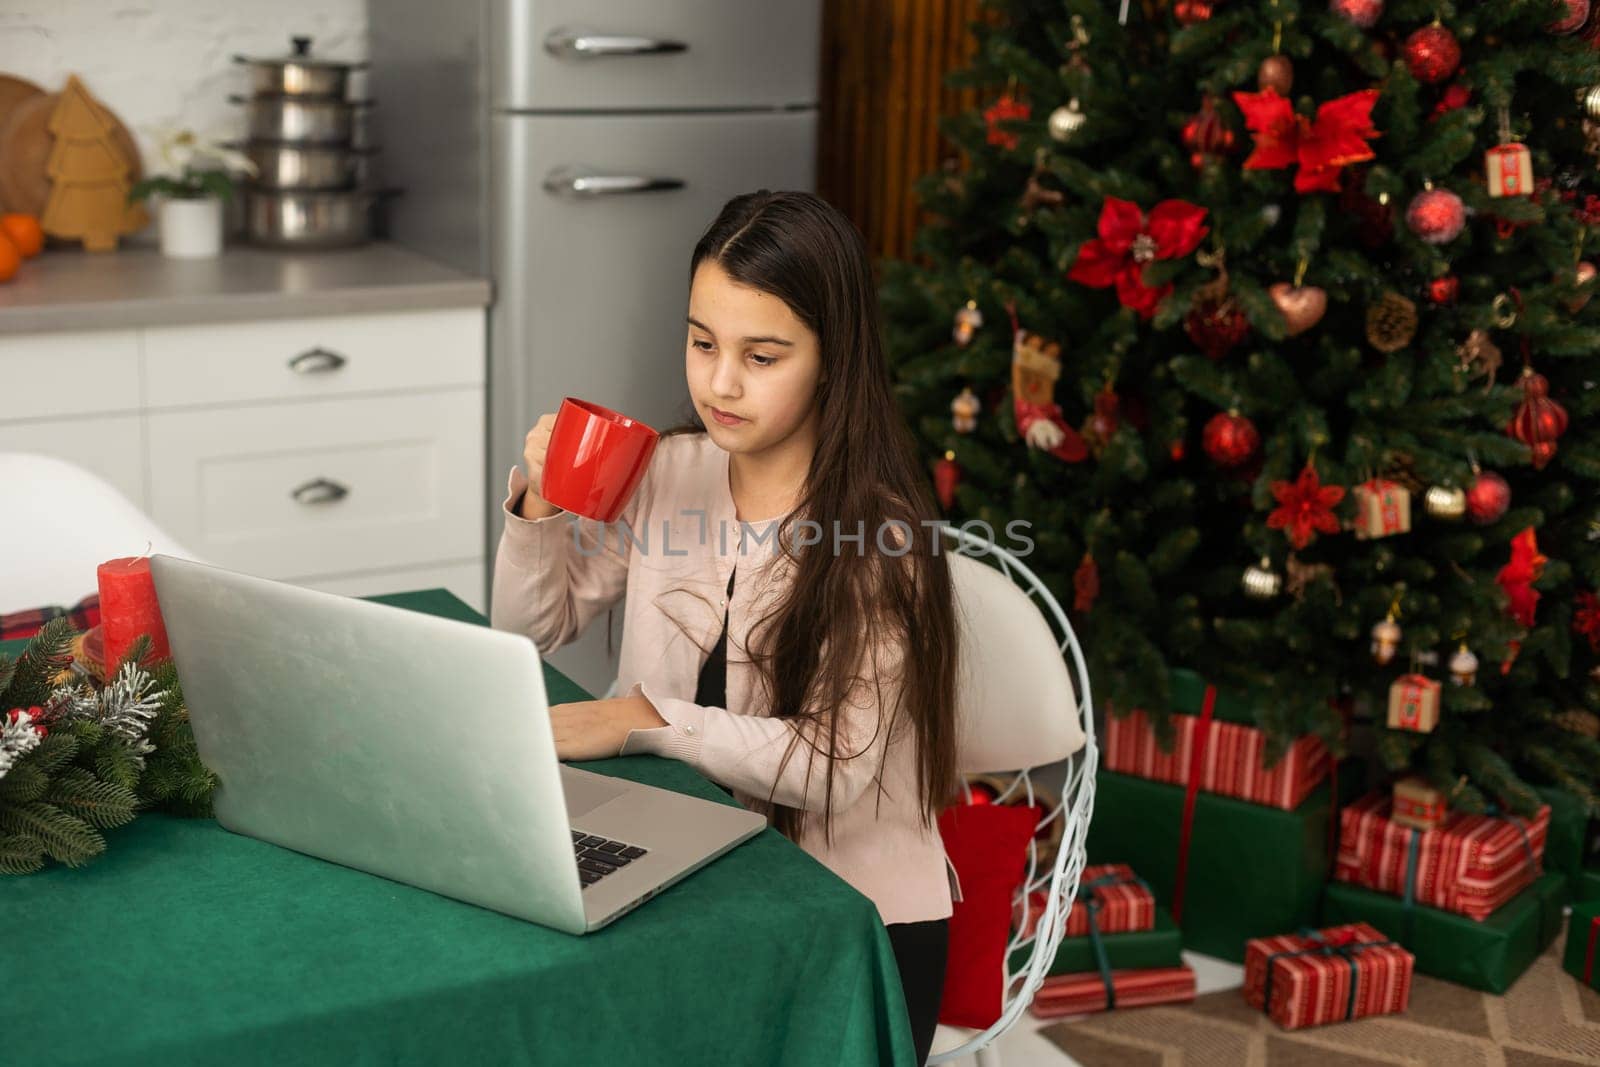 Teenage girl with gifts and laptop near the Christmas tree. Living room interior with Christmas tree and decorations. New Year. Gift giving